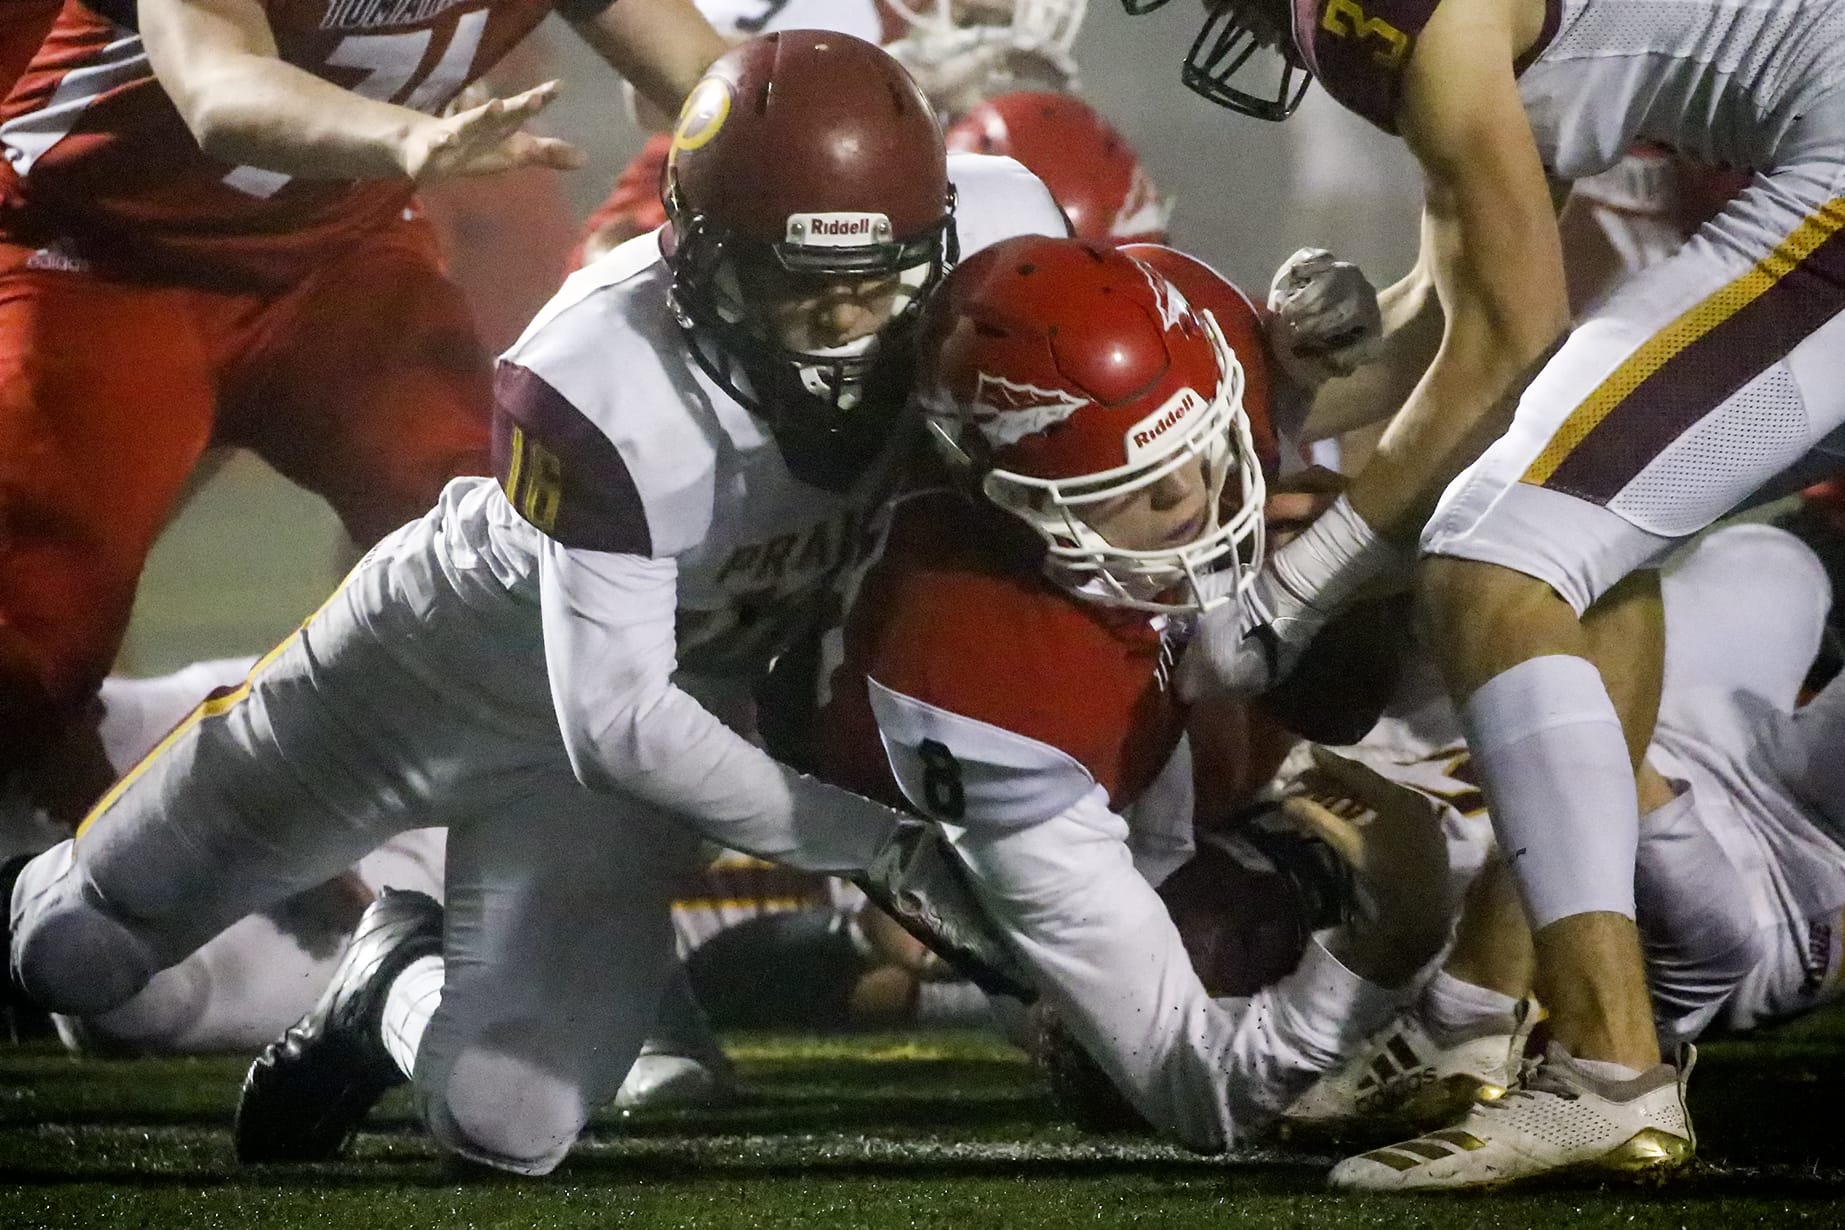 Marysville-Pilchuck's Jake Elwood falls across the goal line for a touchdown with Prairie's Nickolas Lawhead tackling Friday evening at Quil Ceda Stadium in Marysville on November 15, 2019. Marysville-Pilchuck won 37-30 in overtime.